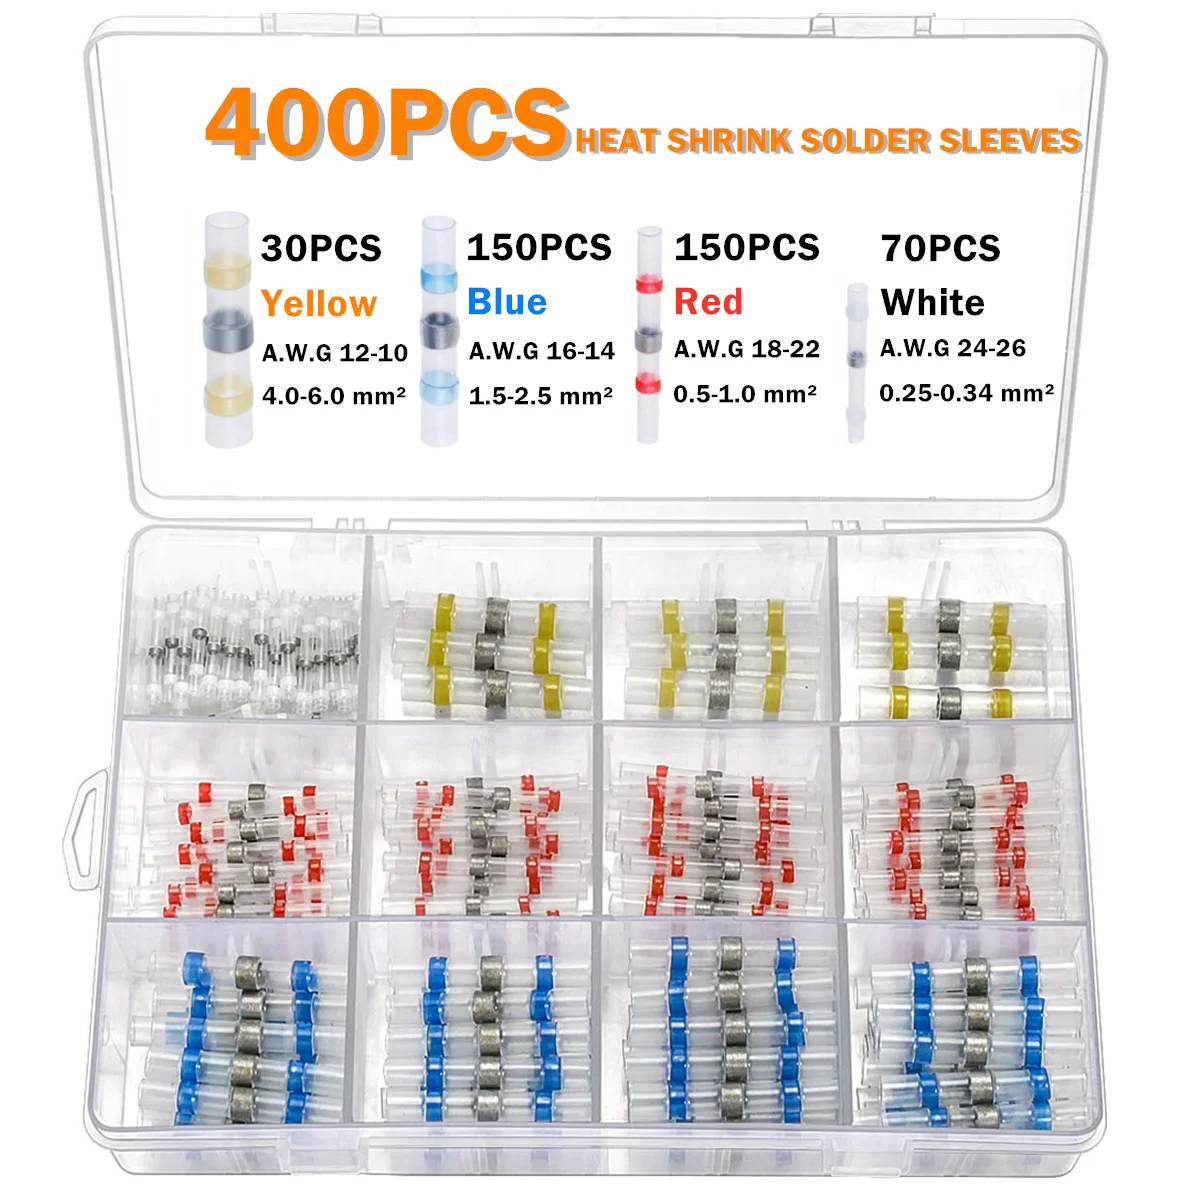 

400PCS Heat Shrink Soldering Sleeve Insulated Waterproof Electrical Wire Connectors Solder Butt Terminals Assortment Kit